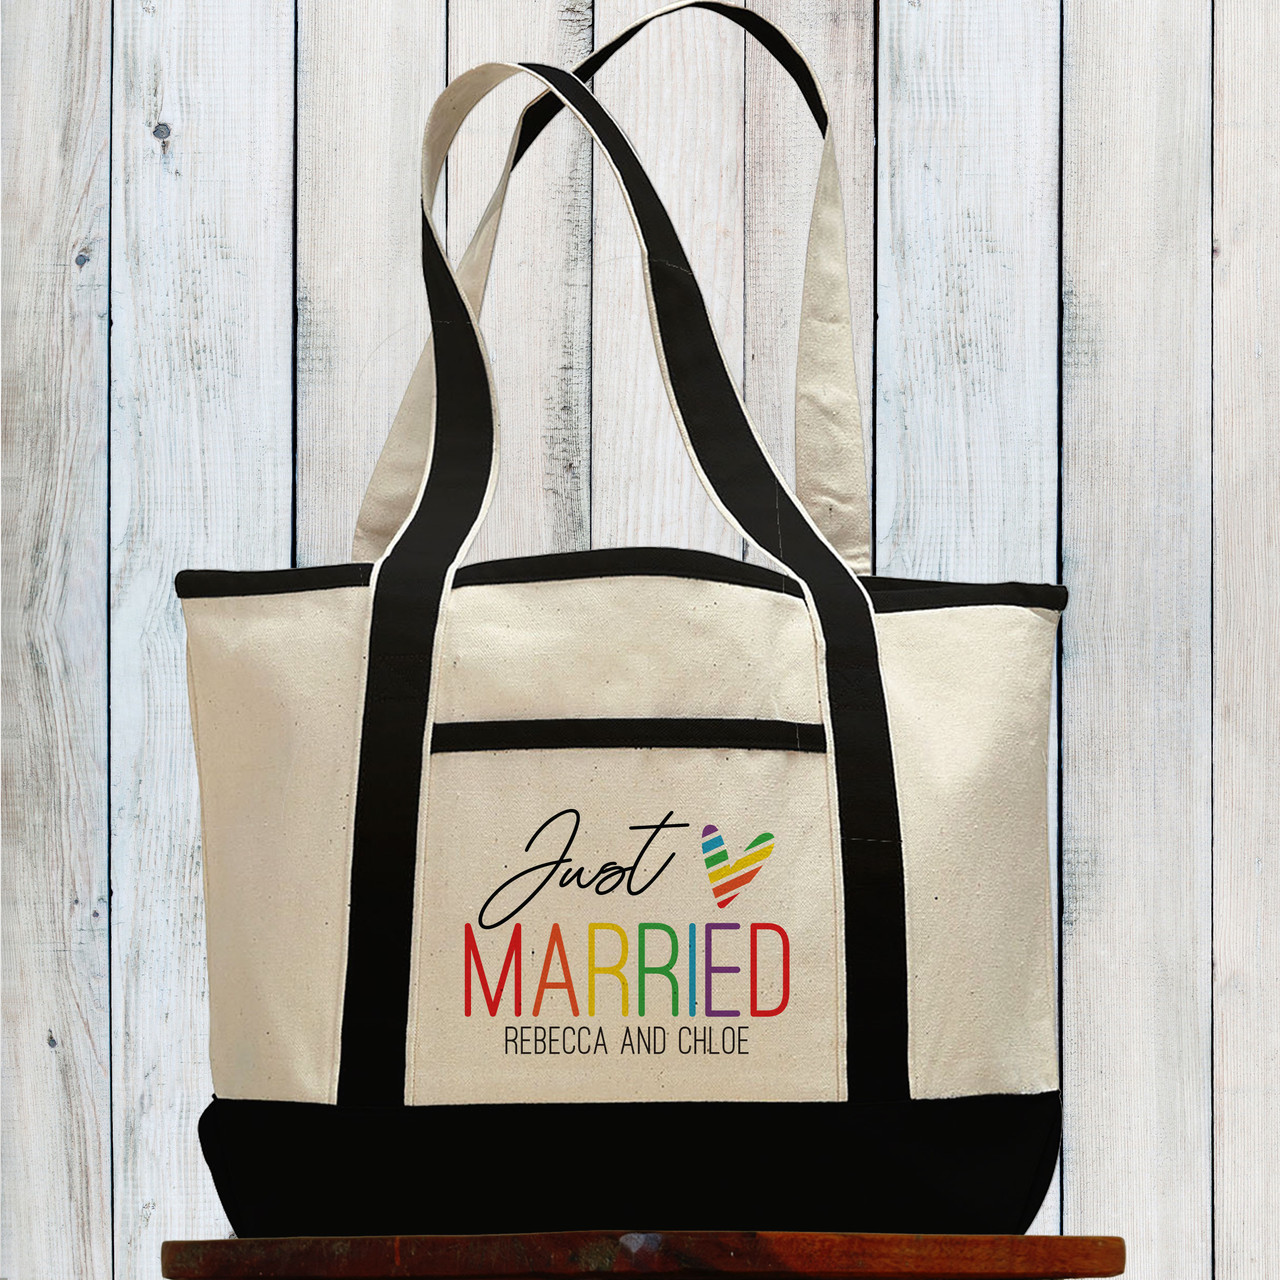 Just Married Personalized Beach Tote Bag for Same Sex Couple pic picture